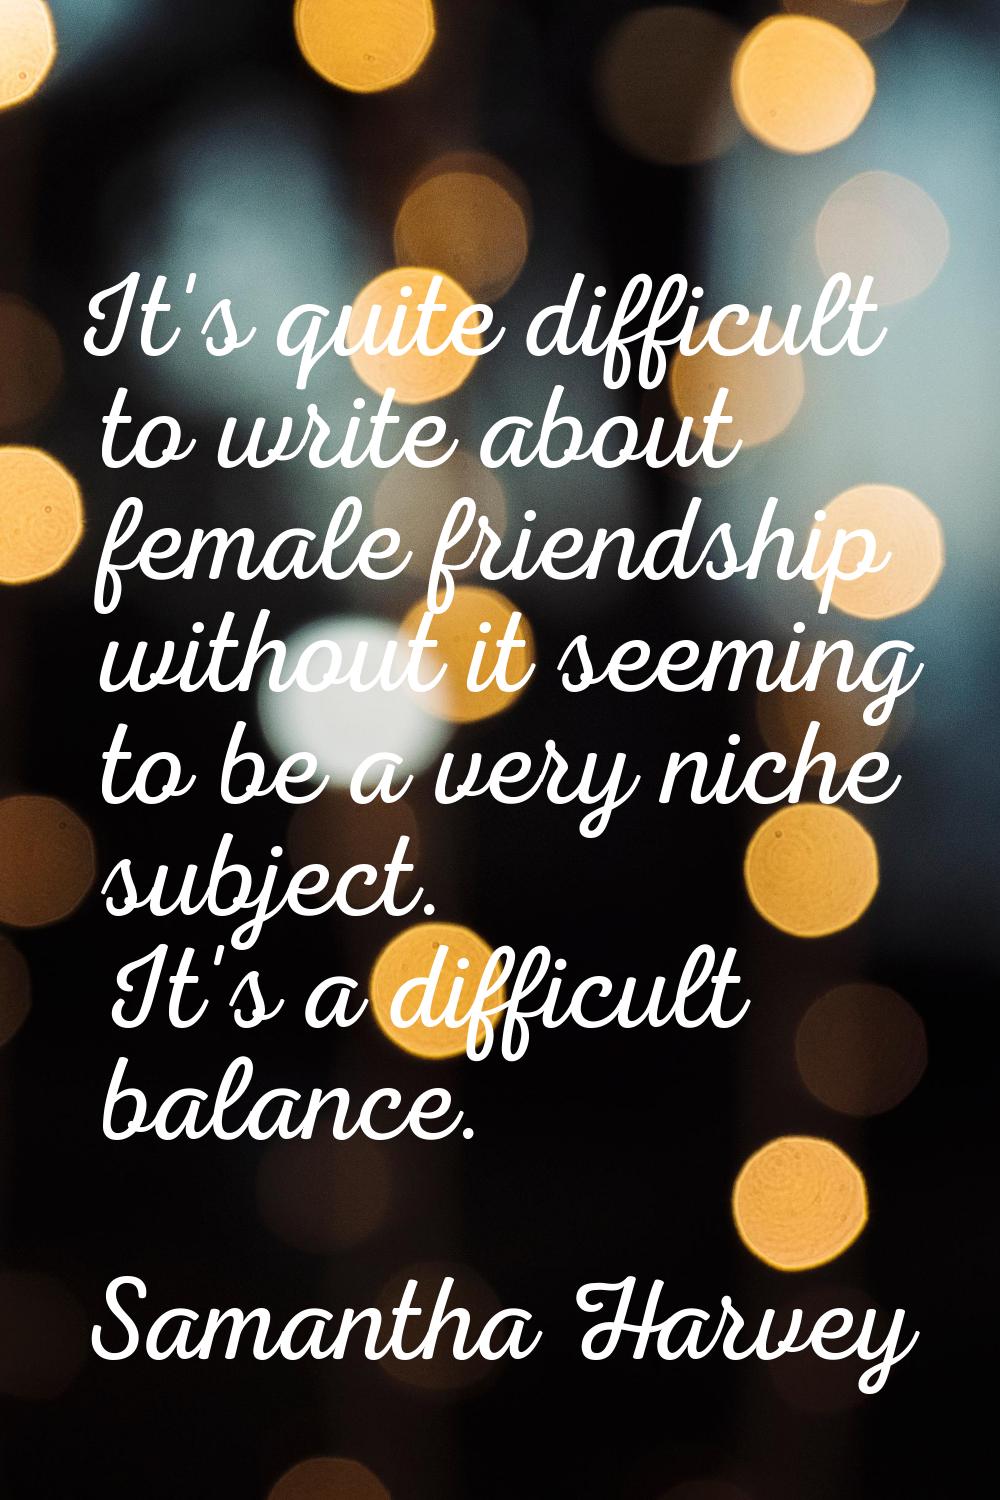 It's quite difficult to write about female friendship without it seeming to be a very niche subject